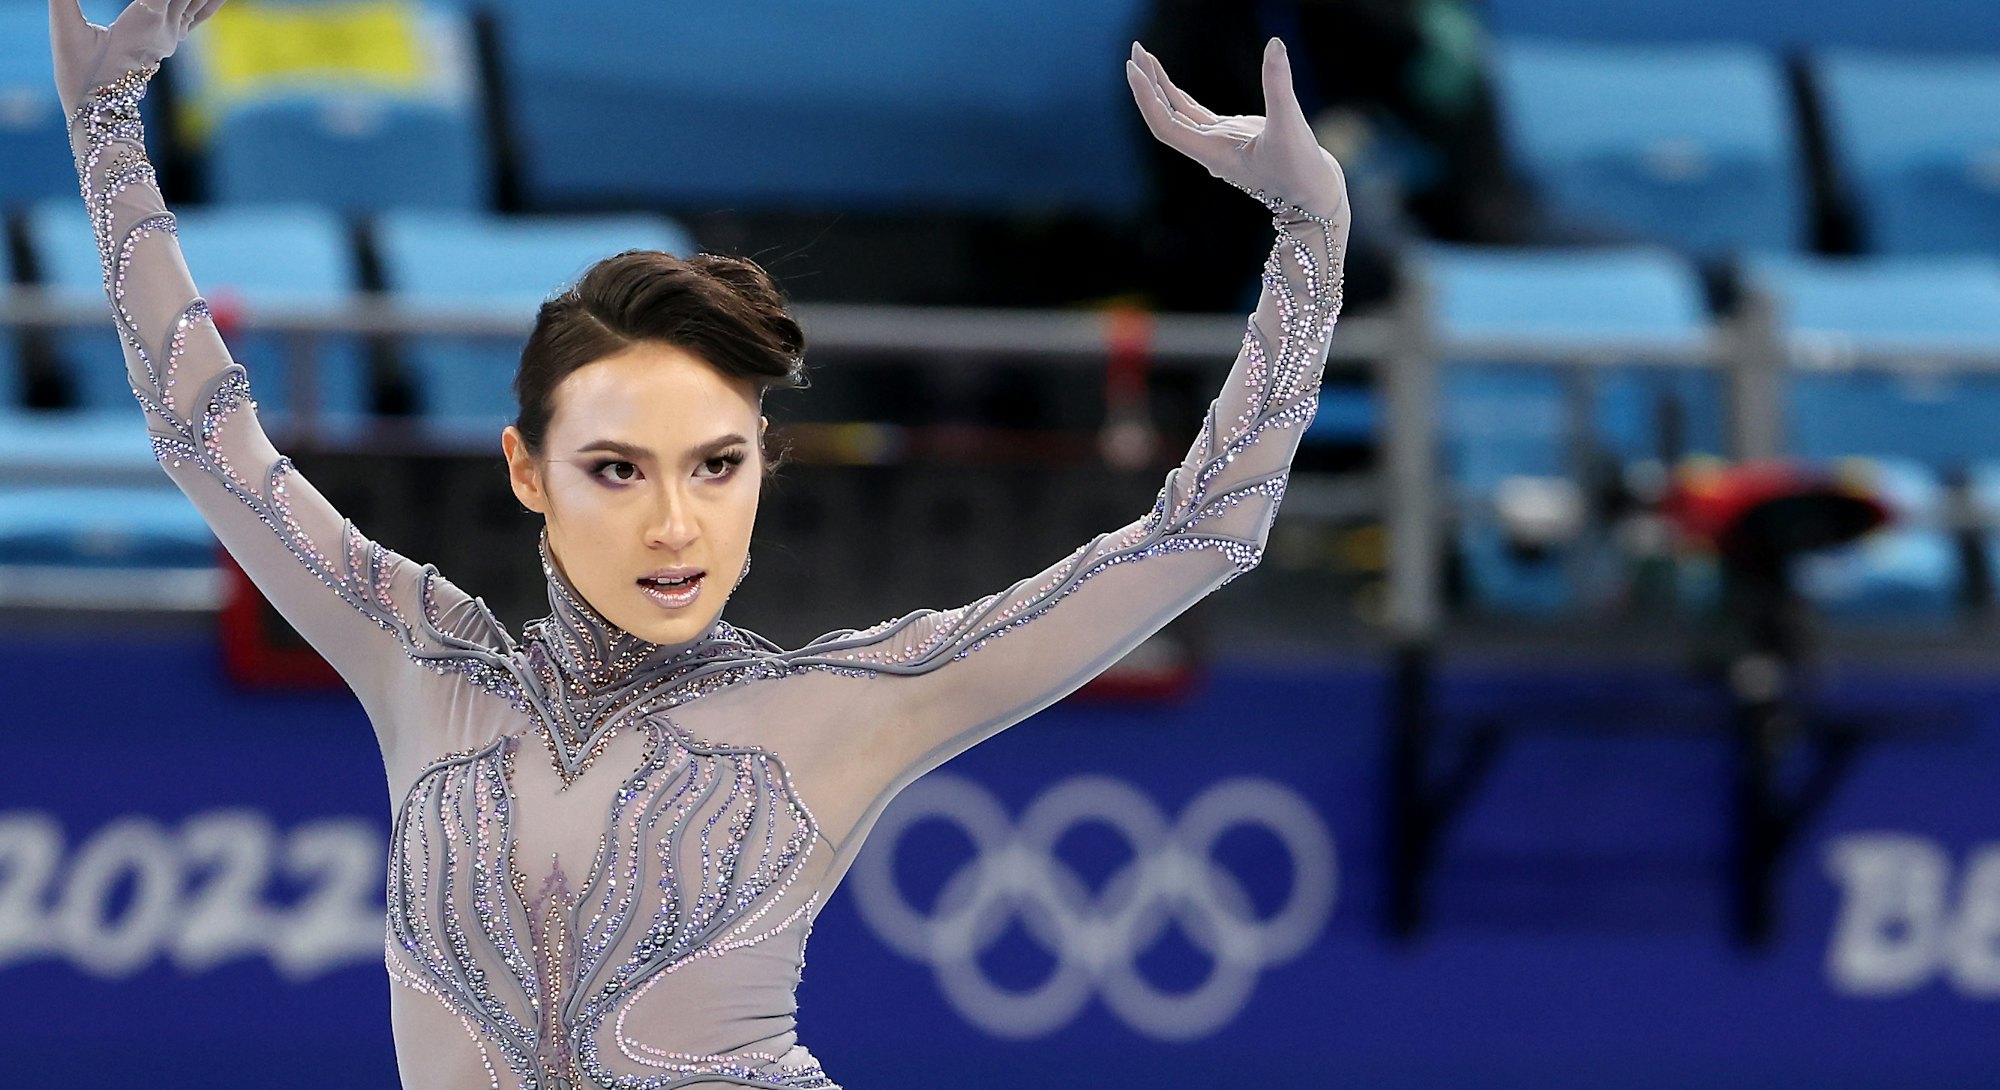 Here are the best makeup & hairstyles at the 2022 Winter Olympics in Beijing.